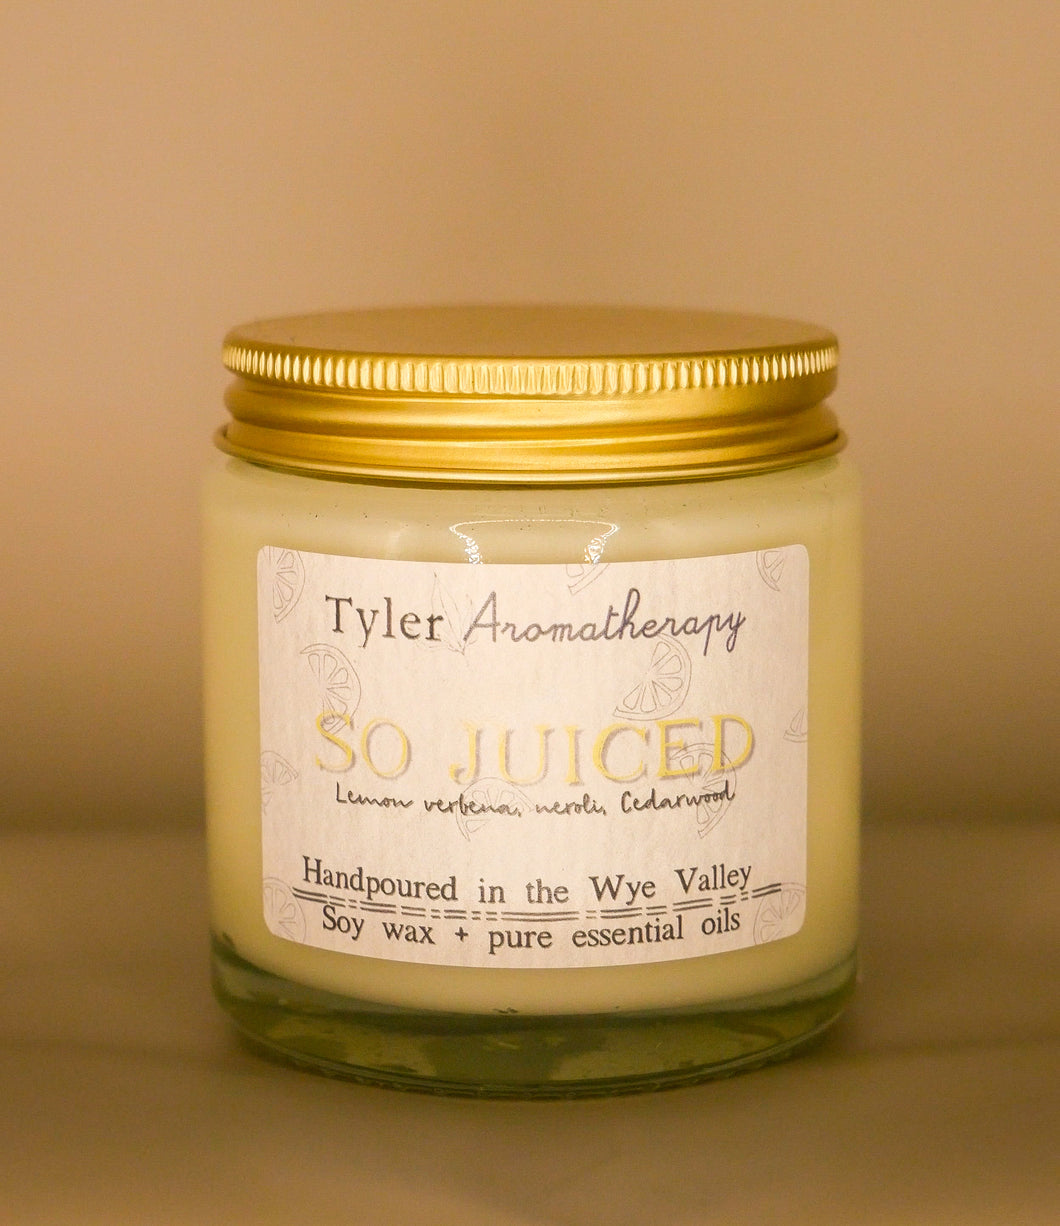 So Juiced mood candle